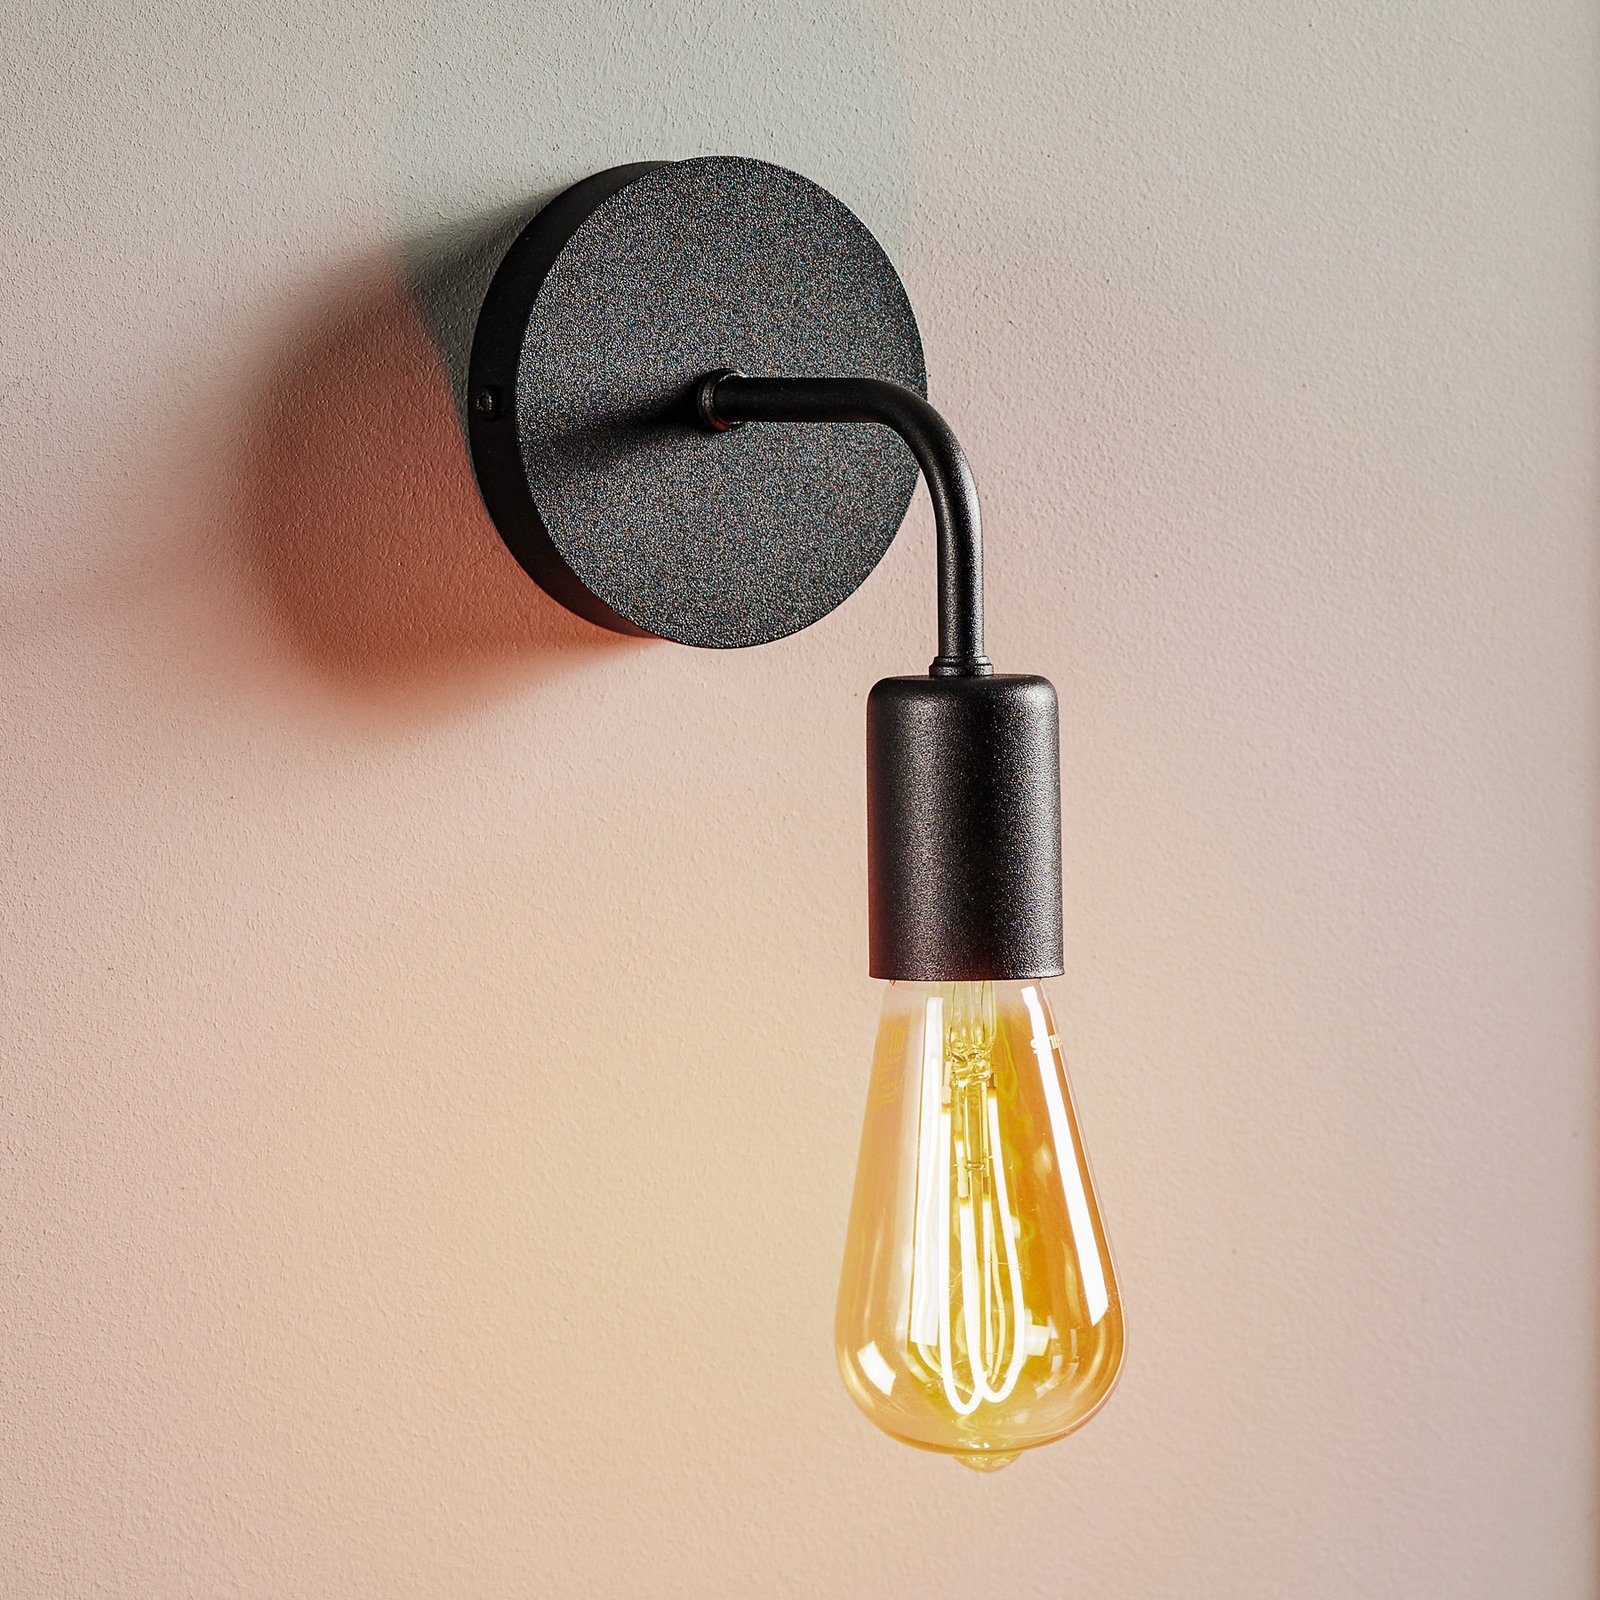 Atol wall light made of steel in black